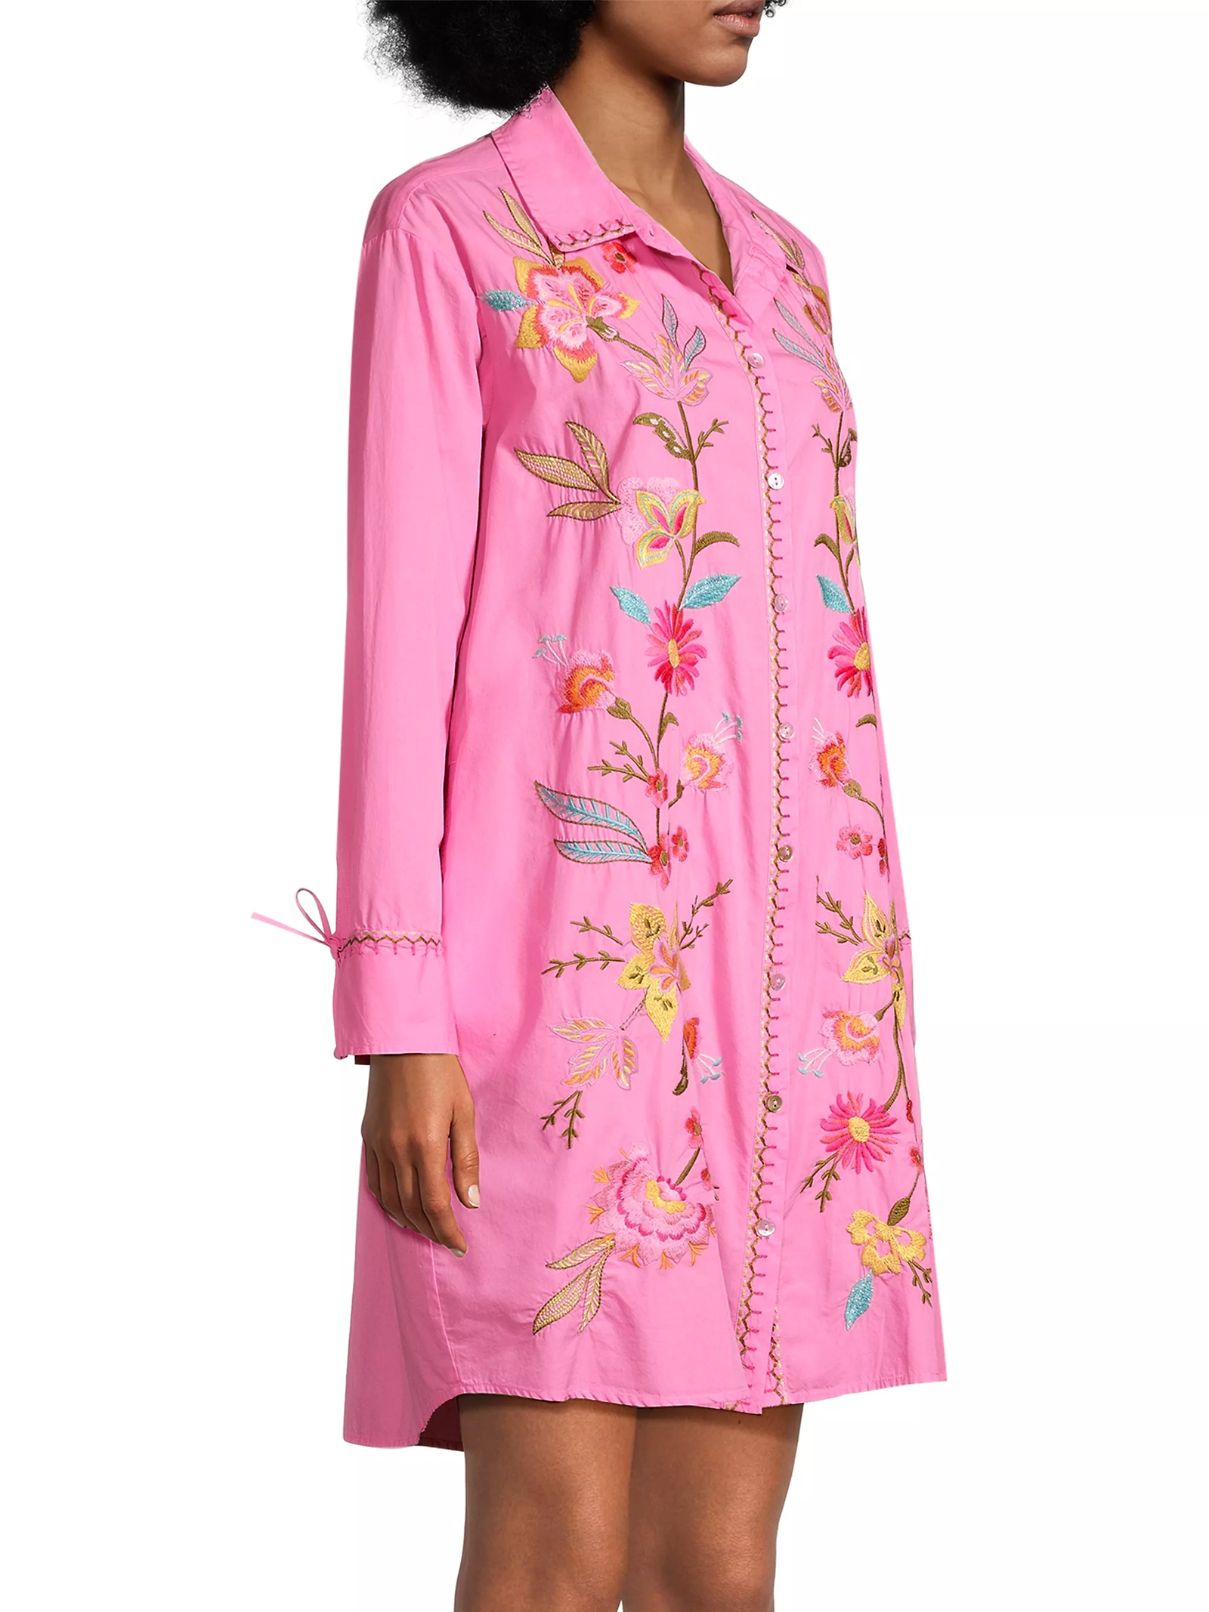 johnny was camellia ruched sleeve dress in spring rose